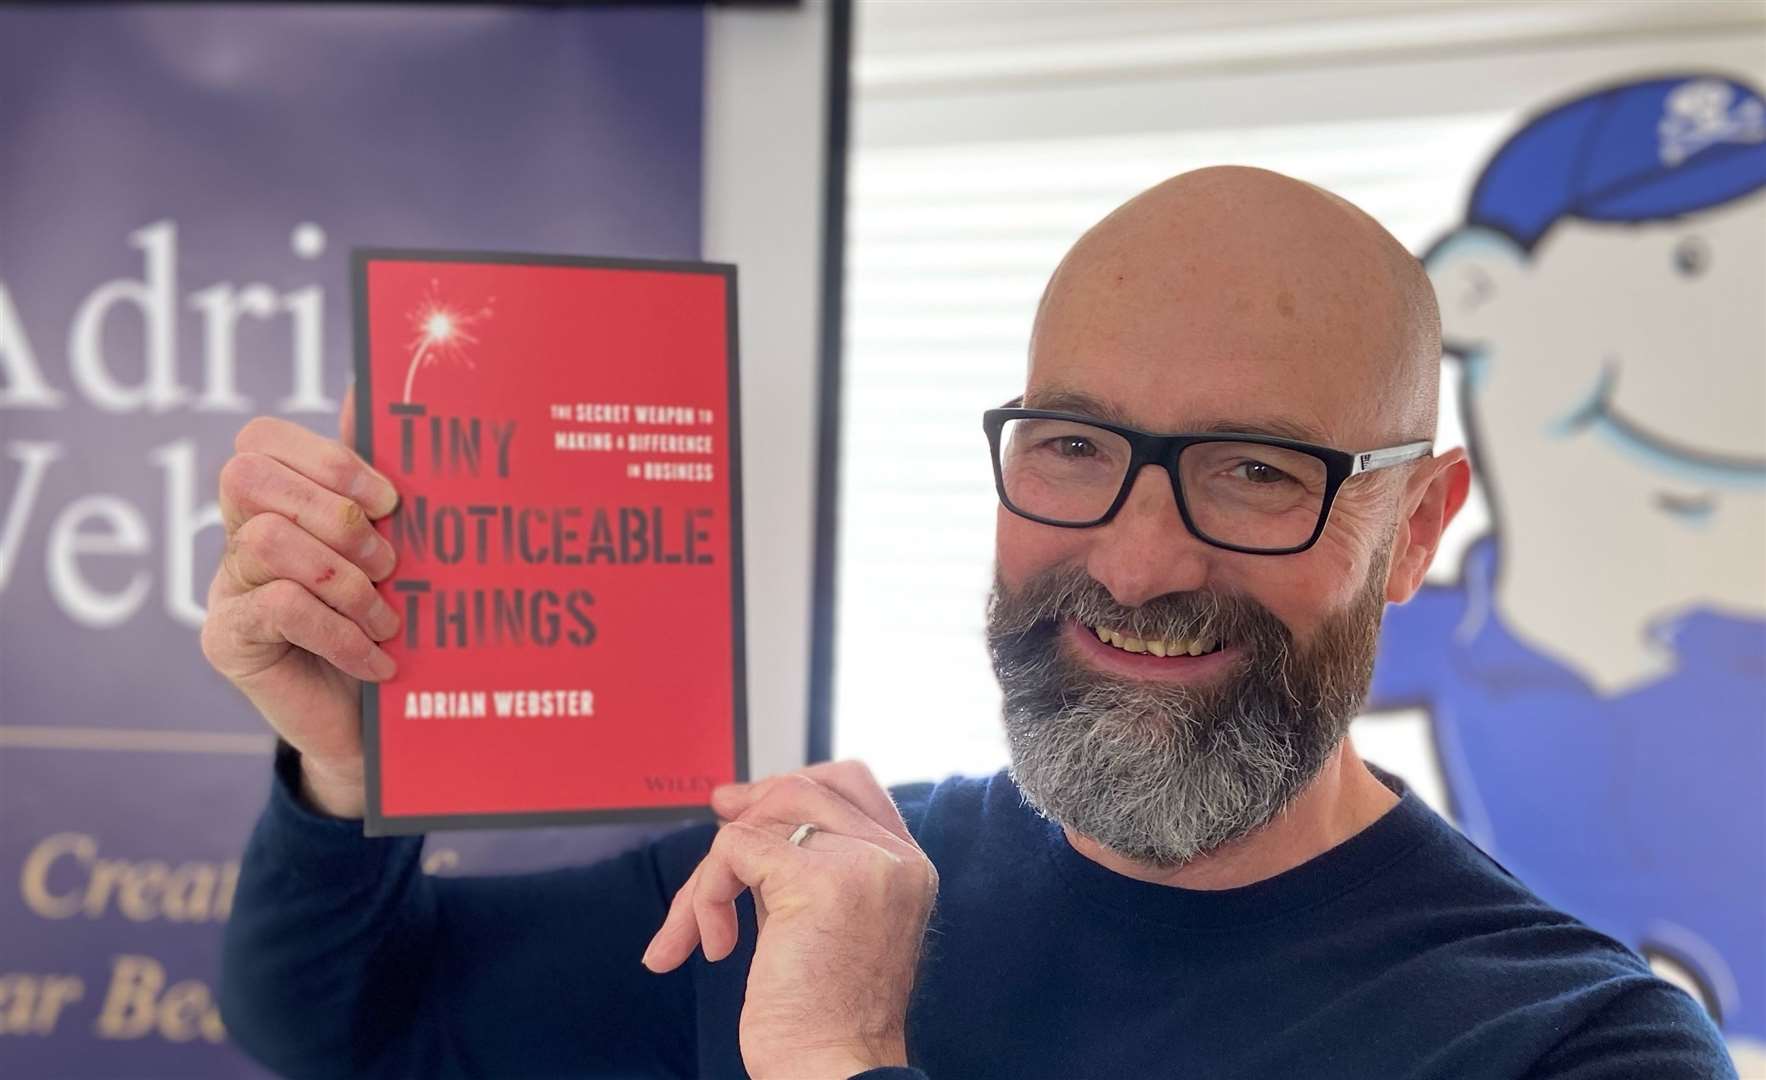 Adrian Webster with his new book